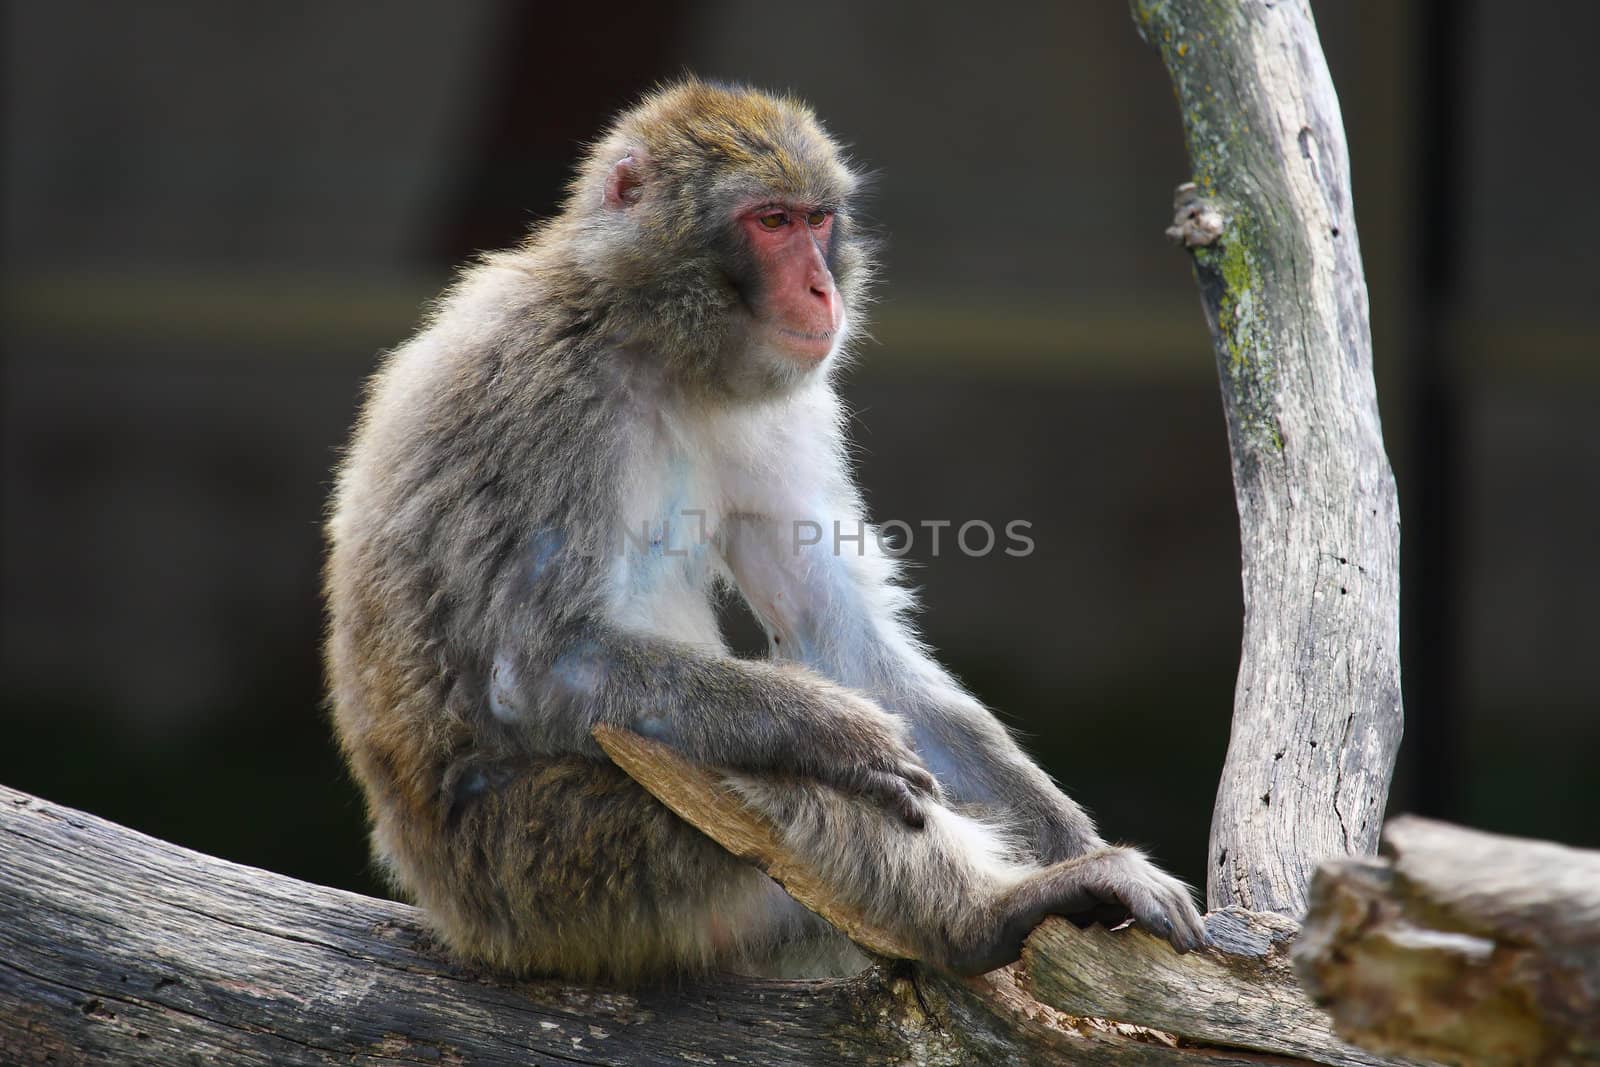 Macaque (Snow) Monkey's relaxing in their environment.